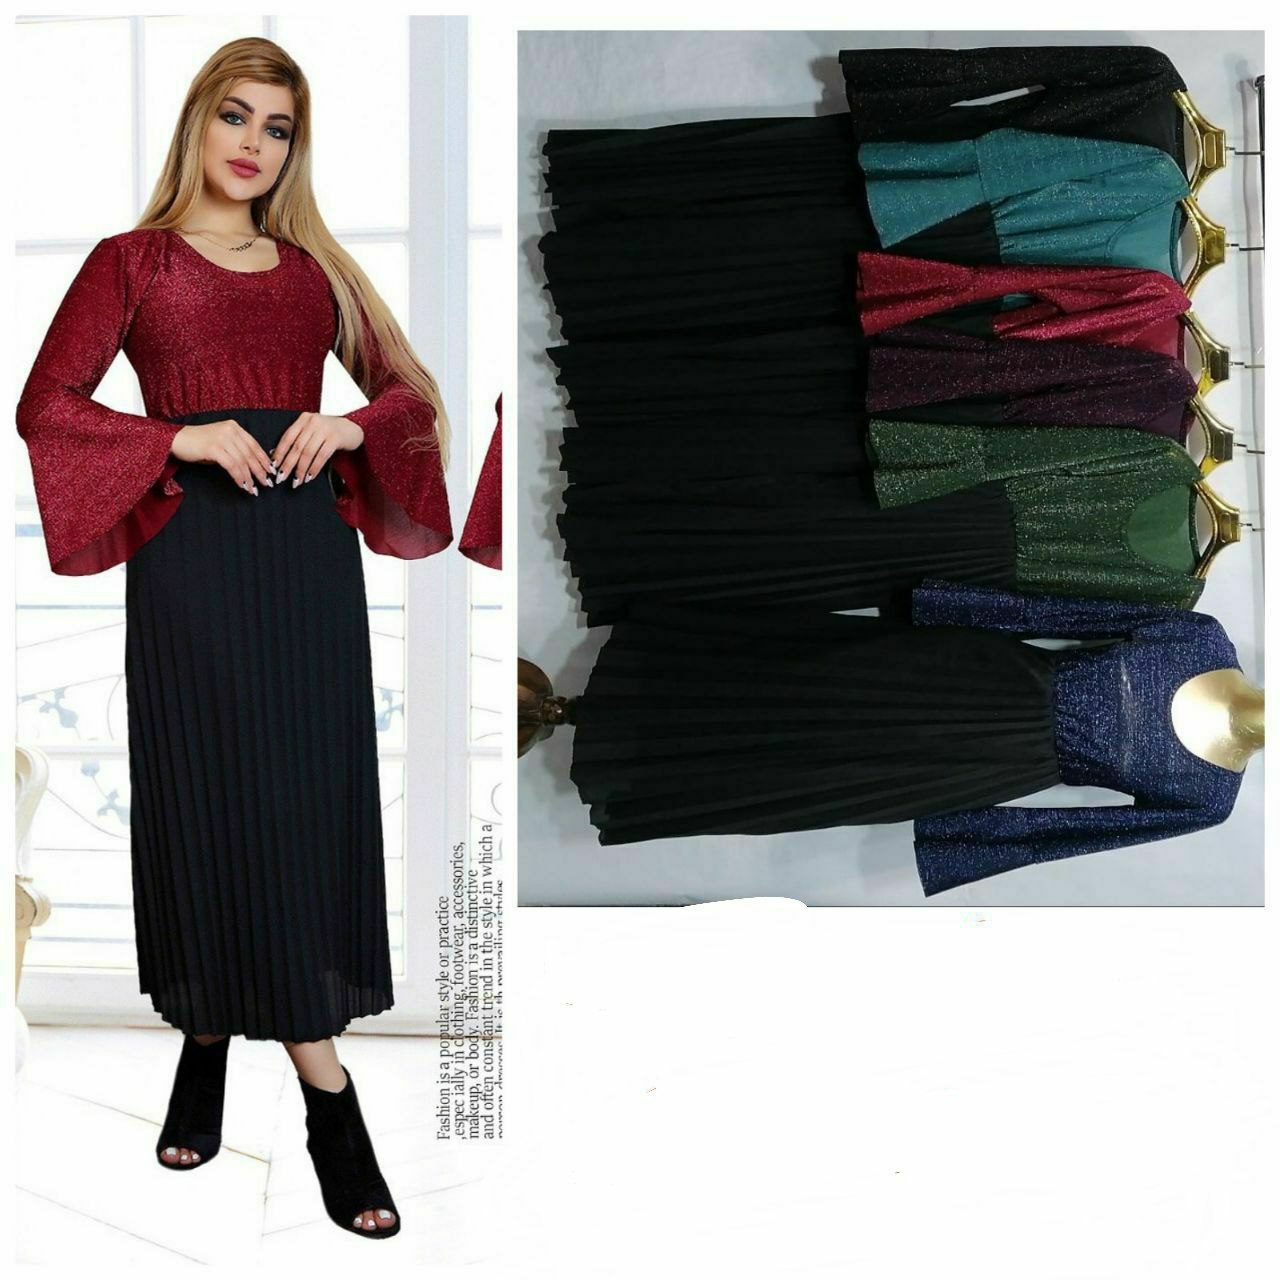 One-size formal blouse and skirt with color